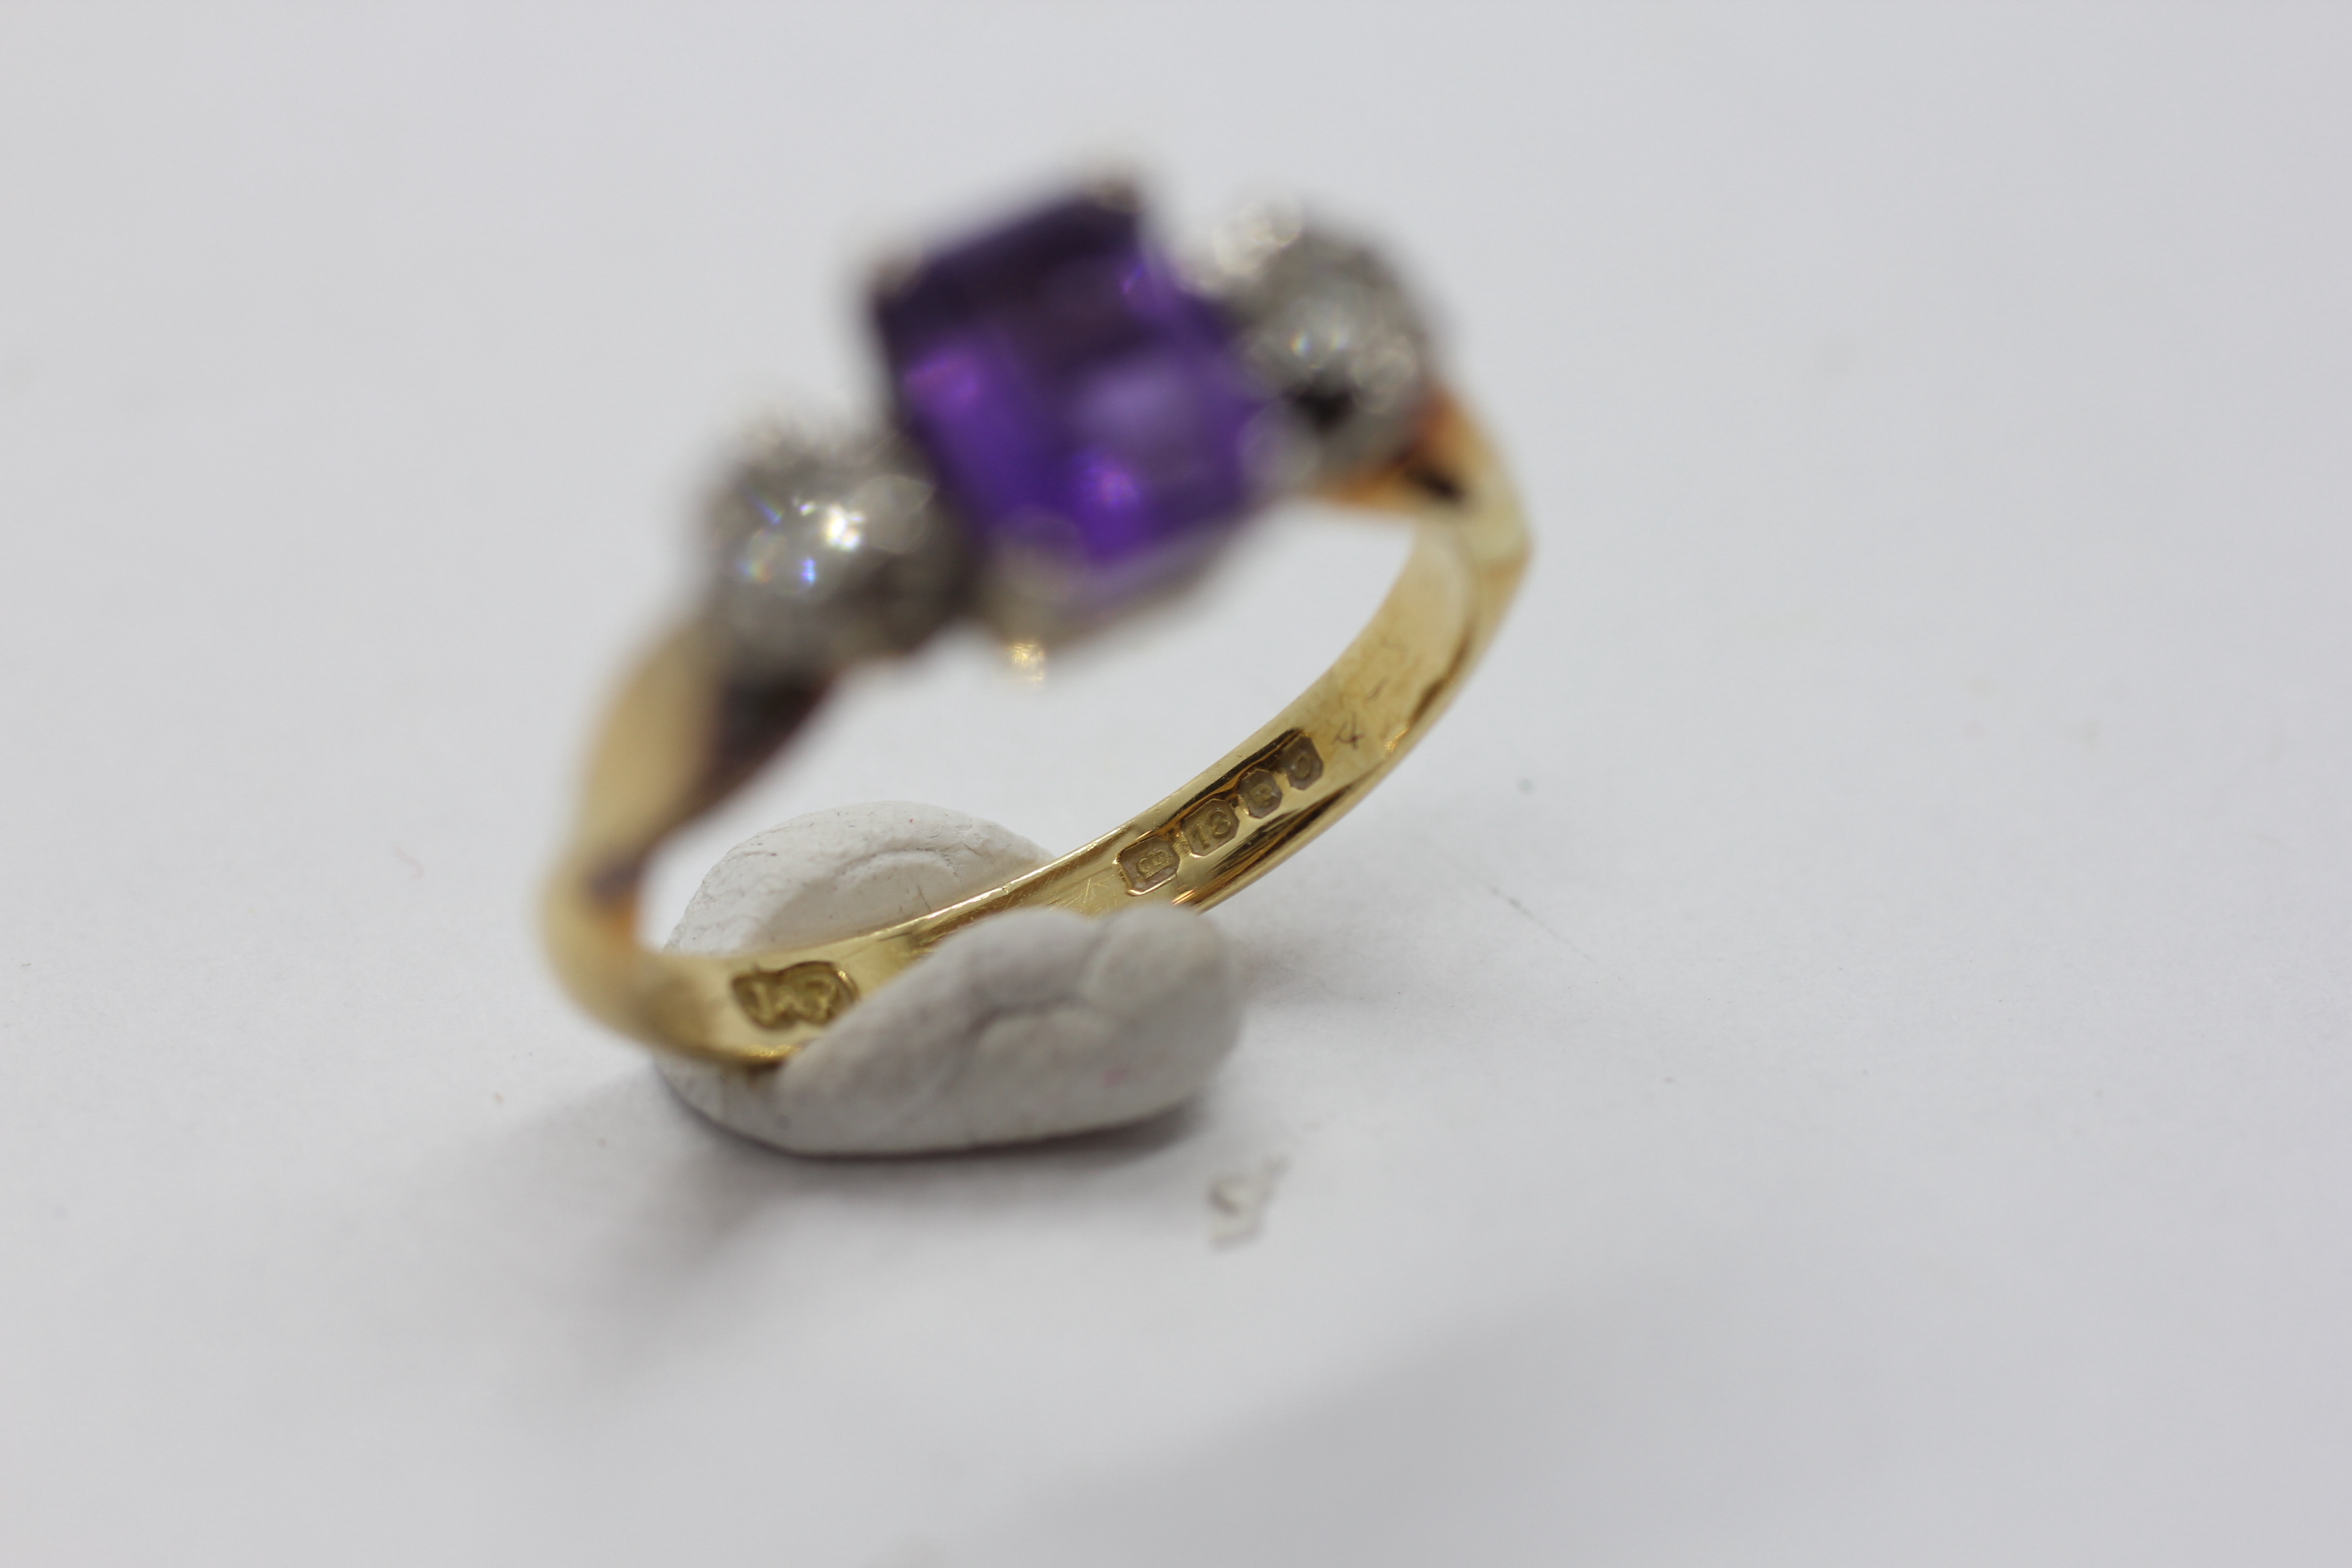 AN 18CT GOLD RING SET WITH A CENTRAL EMERALD CUT AMETHYST AND A DIAMOND EITHER SIDE. - Image 5 of 7